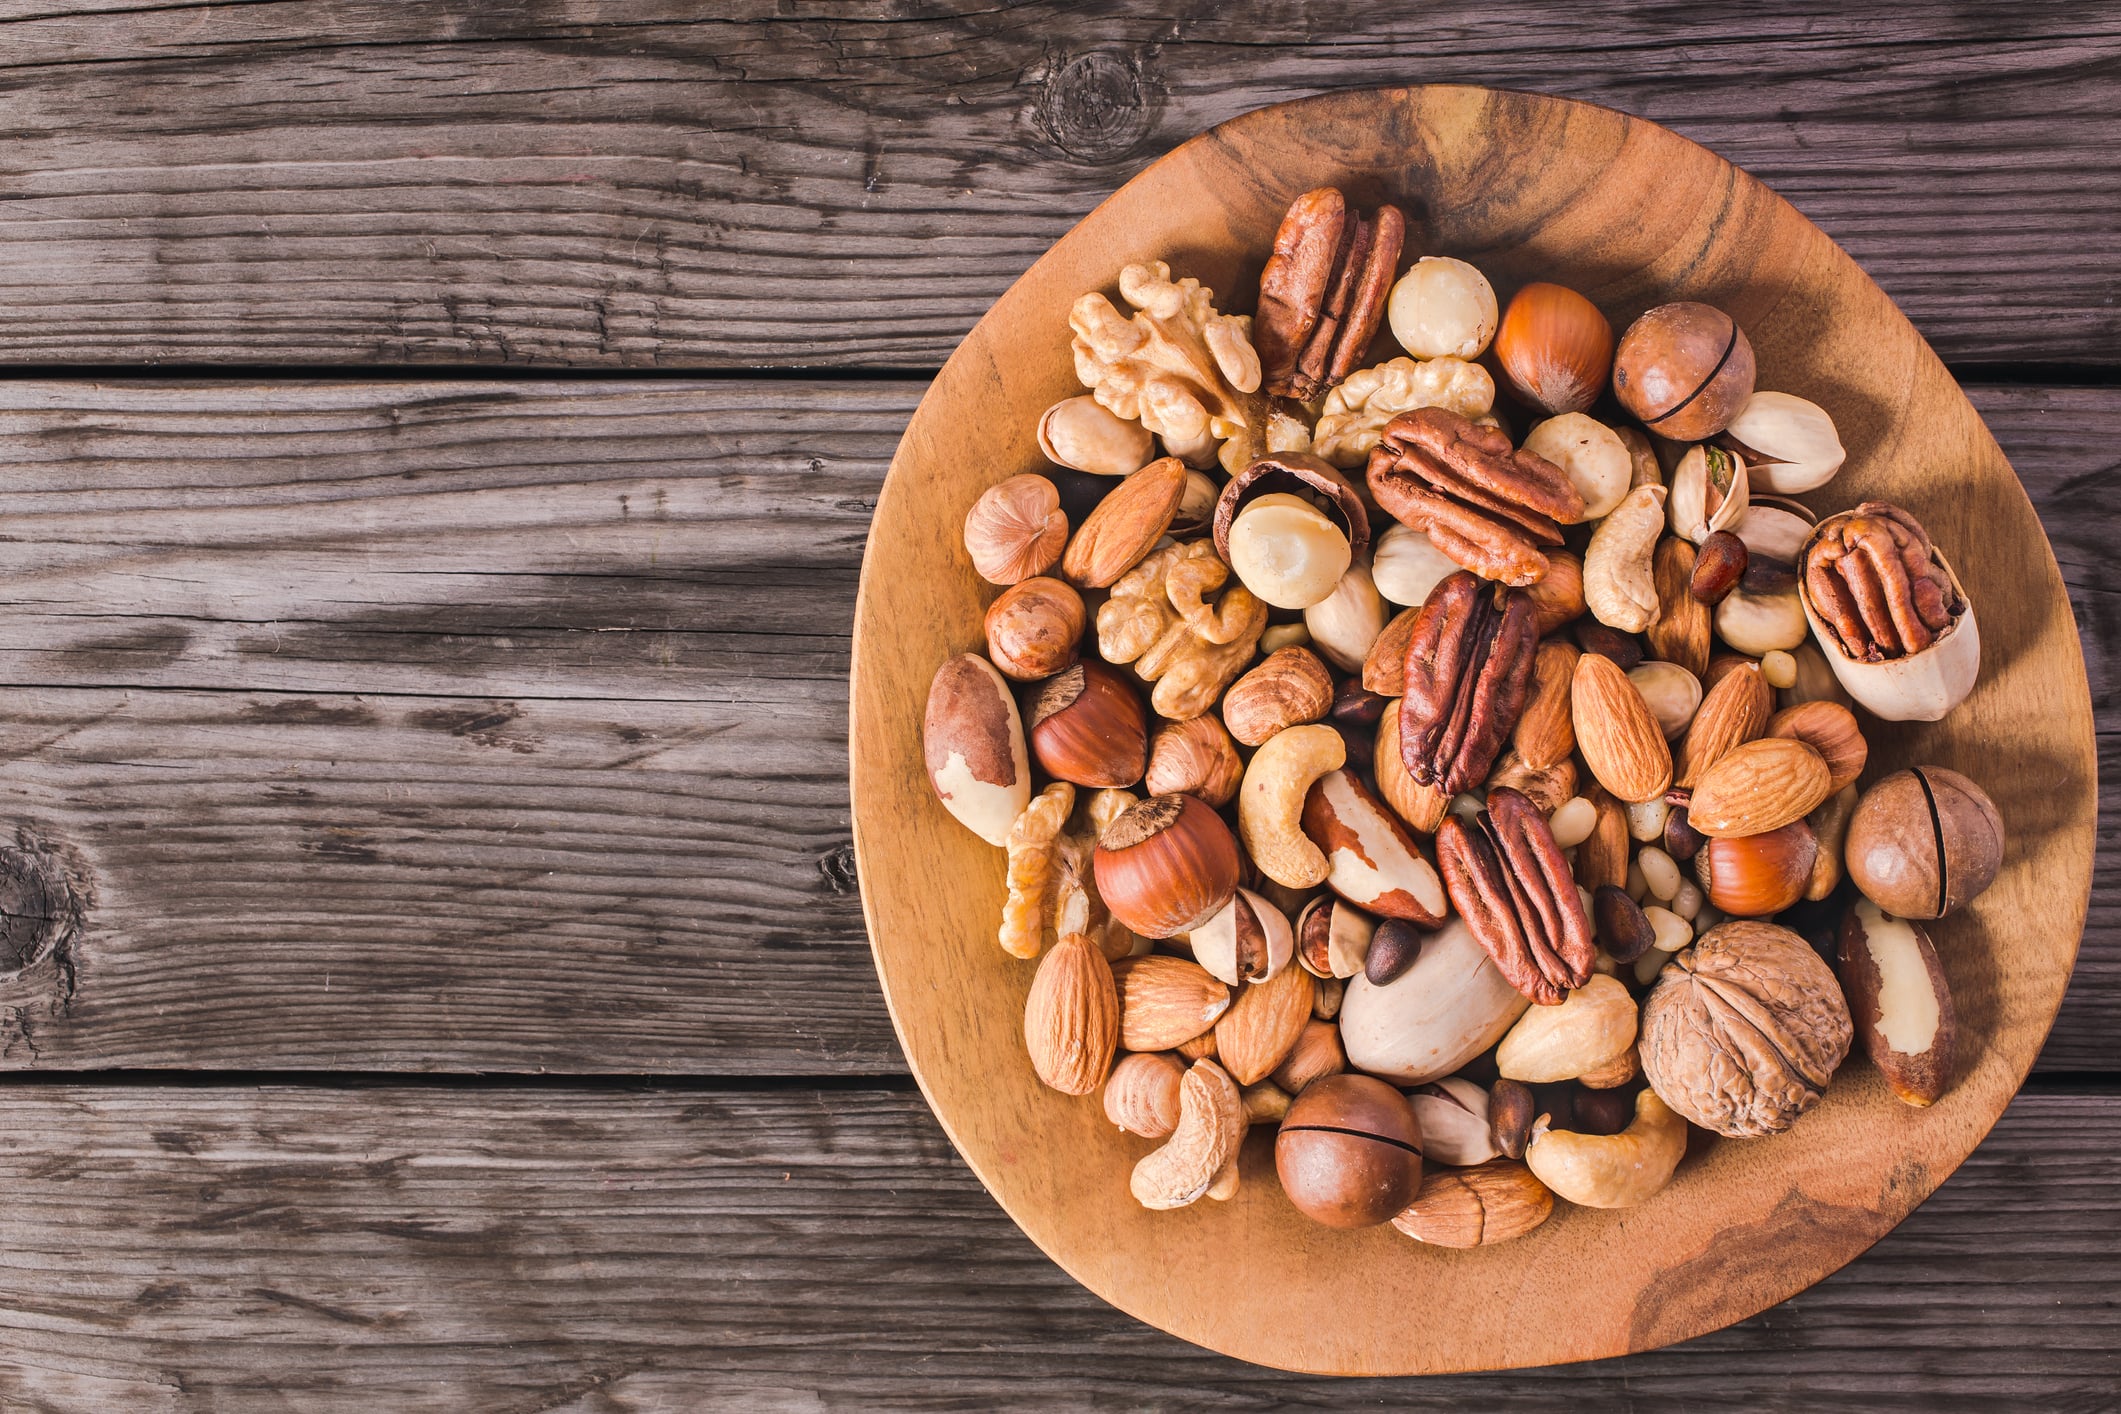 Eating Nuts Improves Thinking, M...